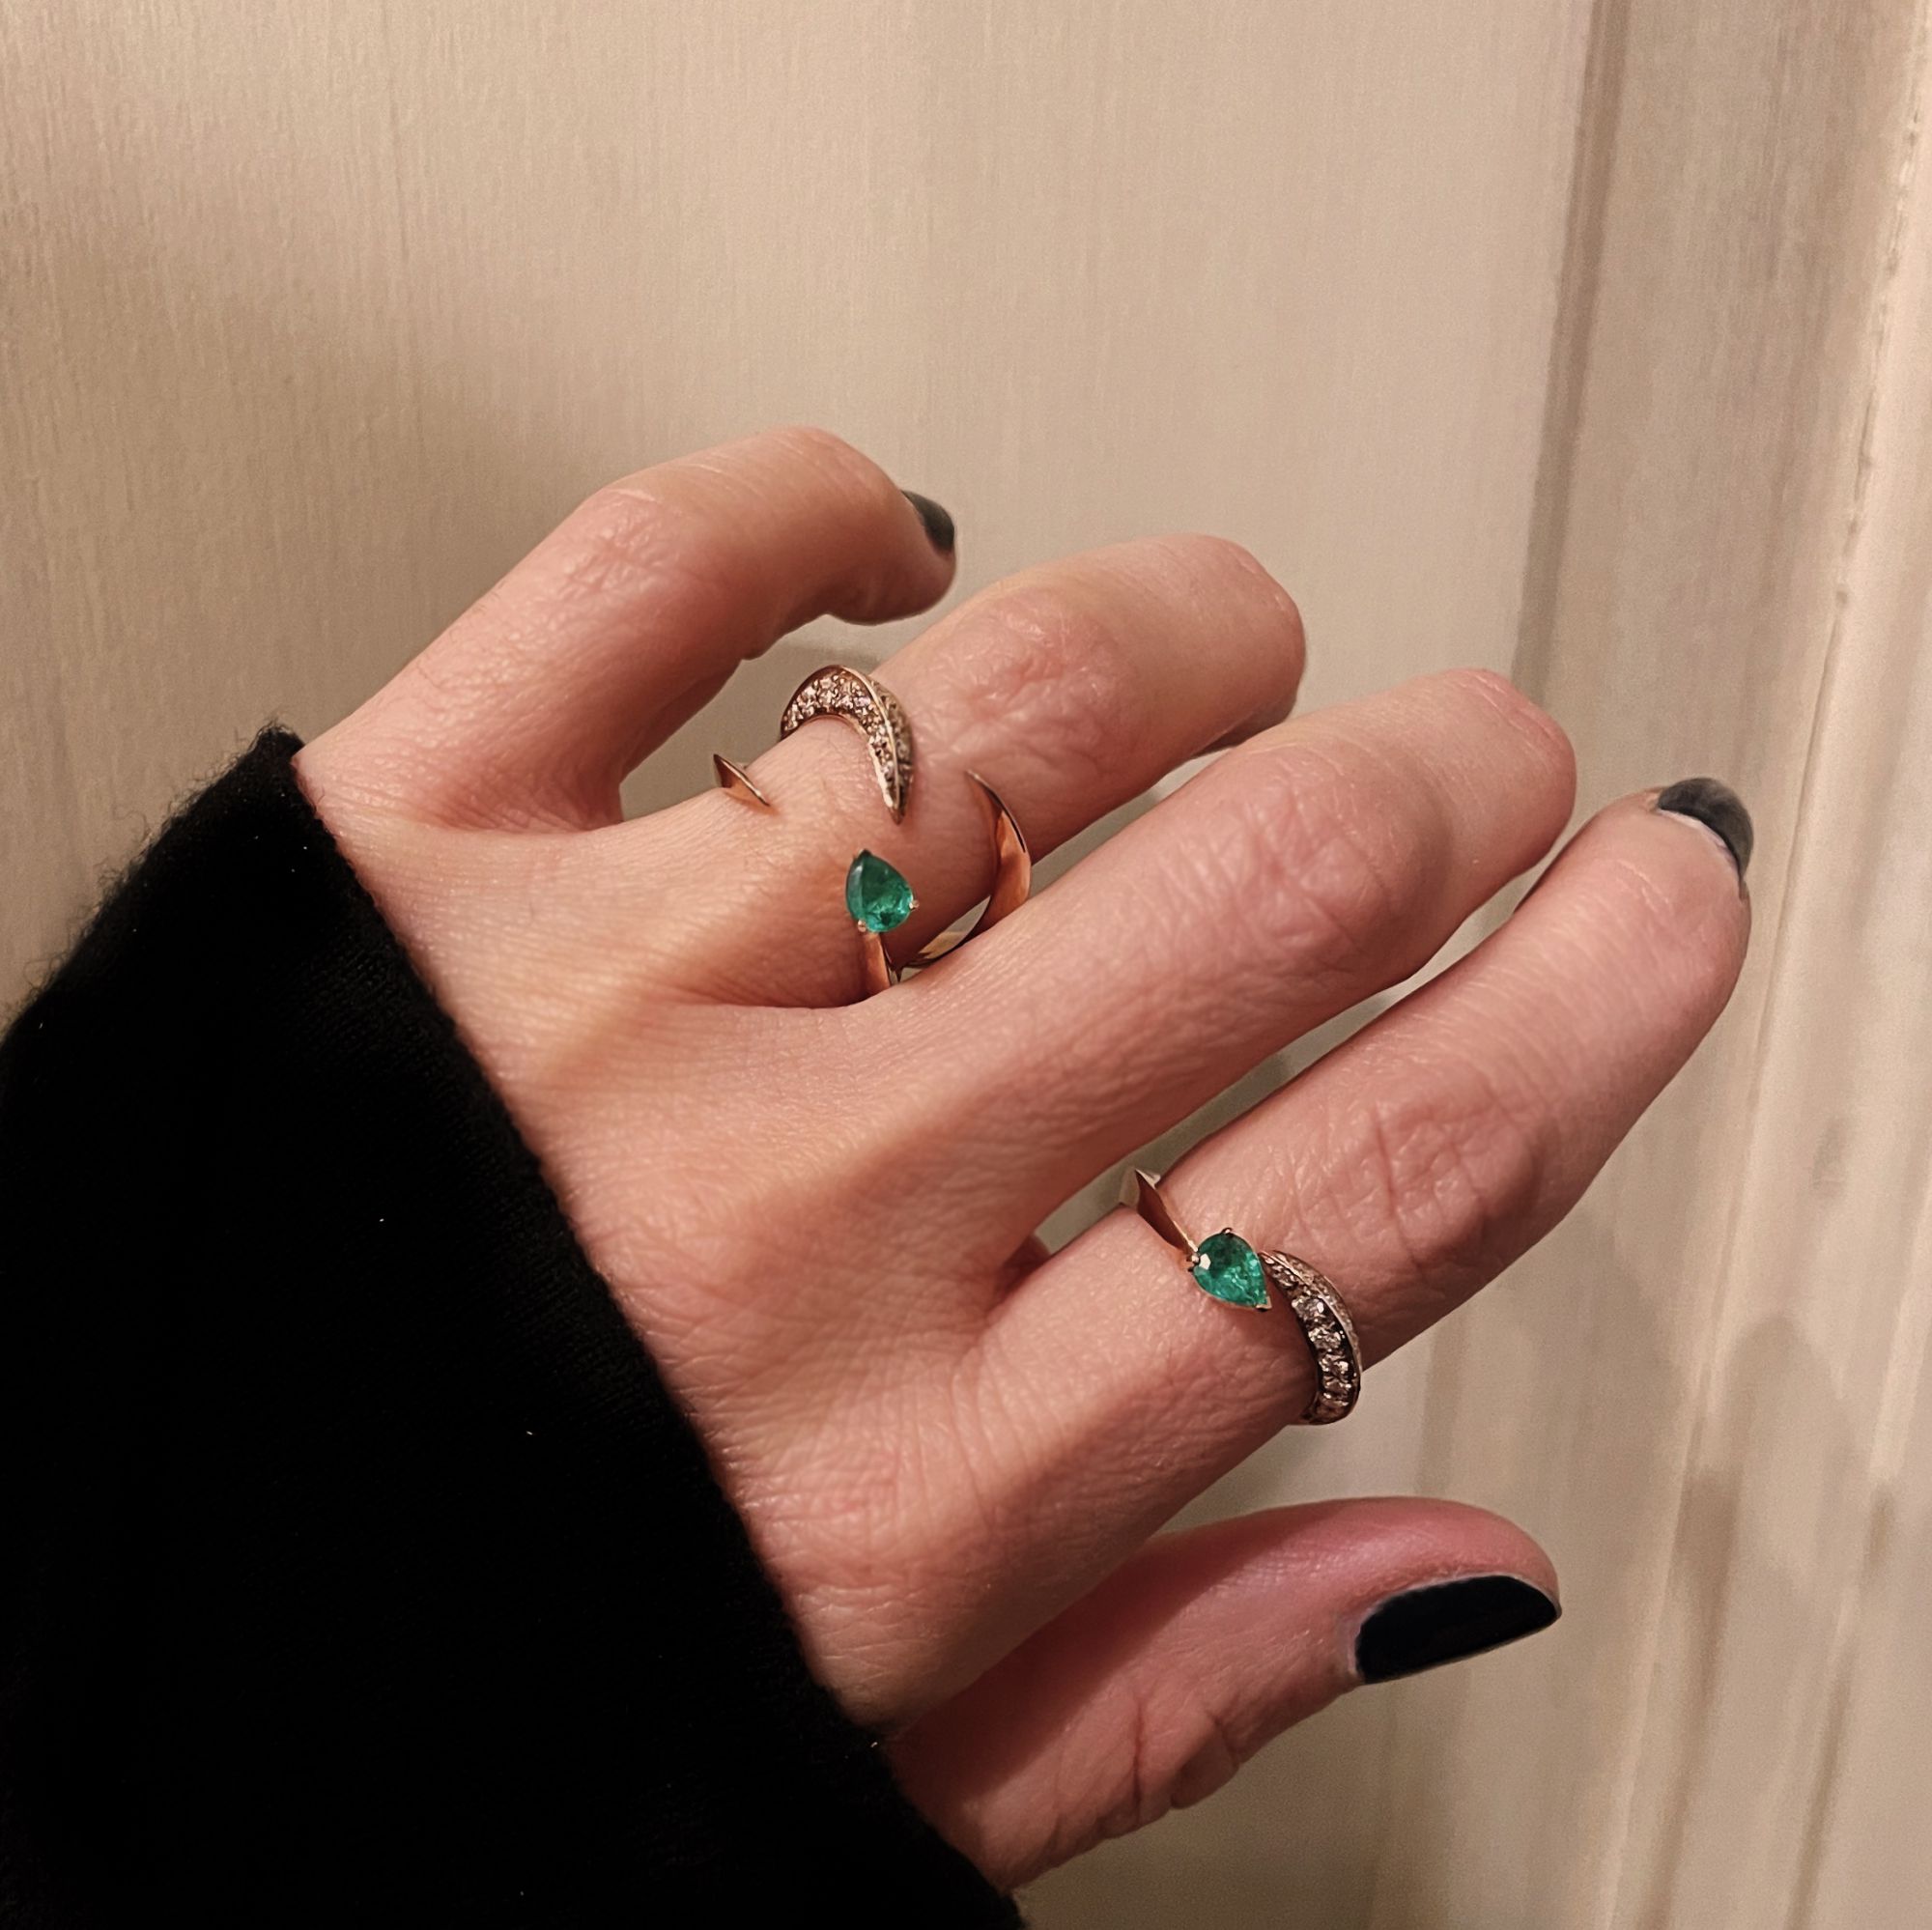 Four elements 'Solis' ring in rose gold with emerald SOLIS | AN4 SMRLD PVAU9R CT 0,30 + 0,30